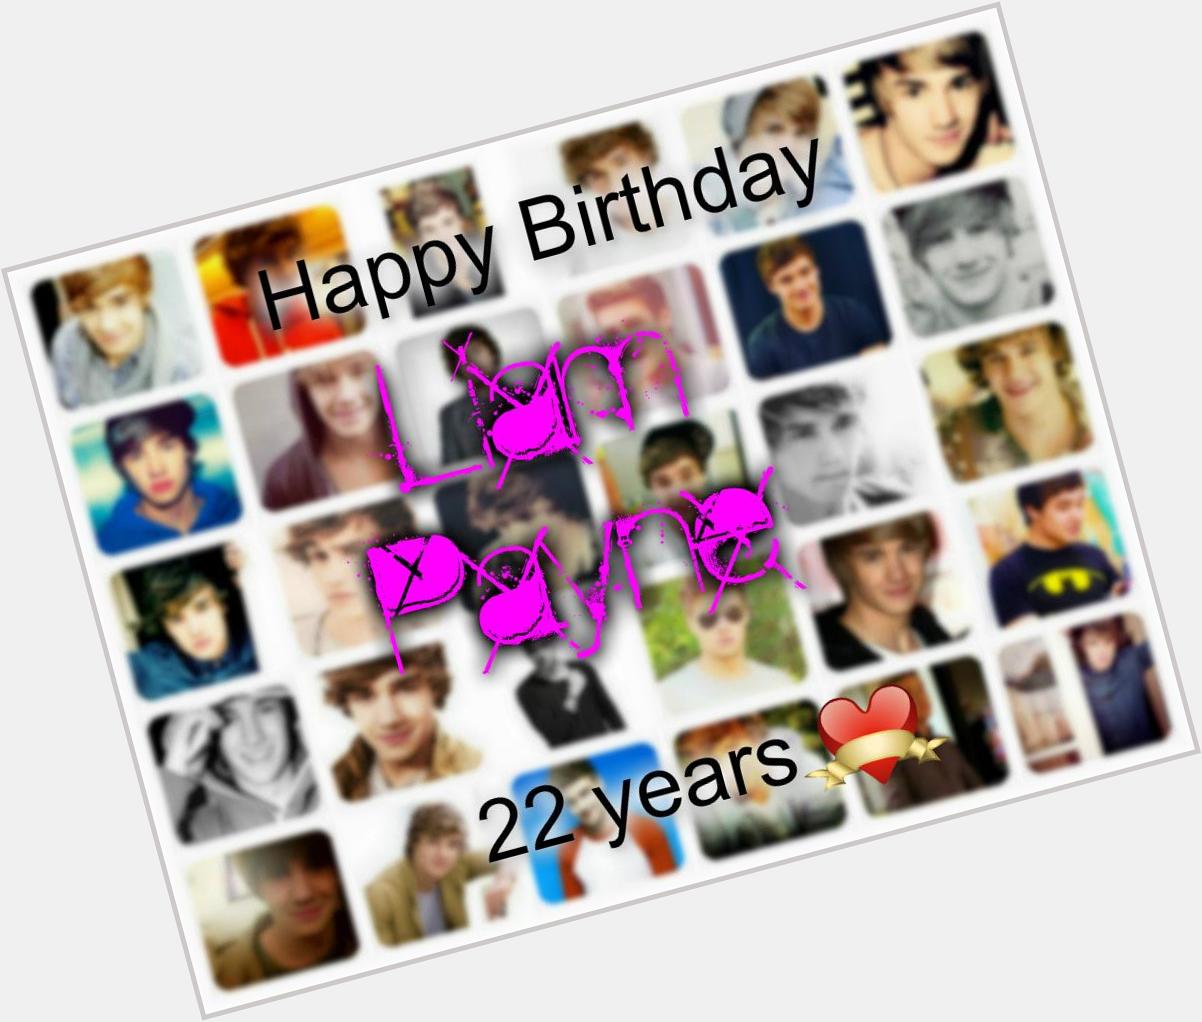  happy birthday Liam , her 22 years to see much love .. you are the pride of Fandom. Y love you 